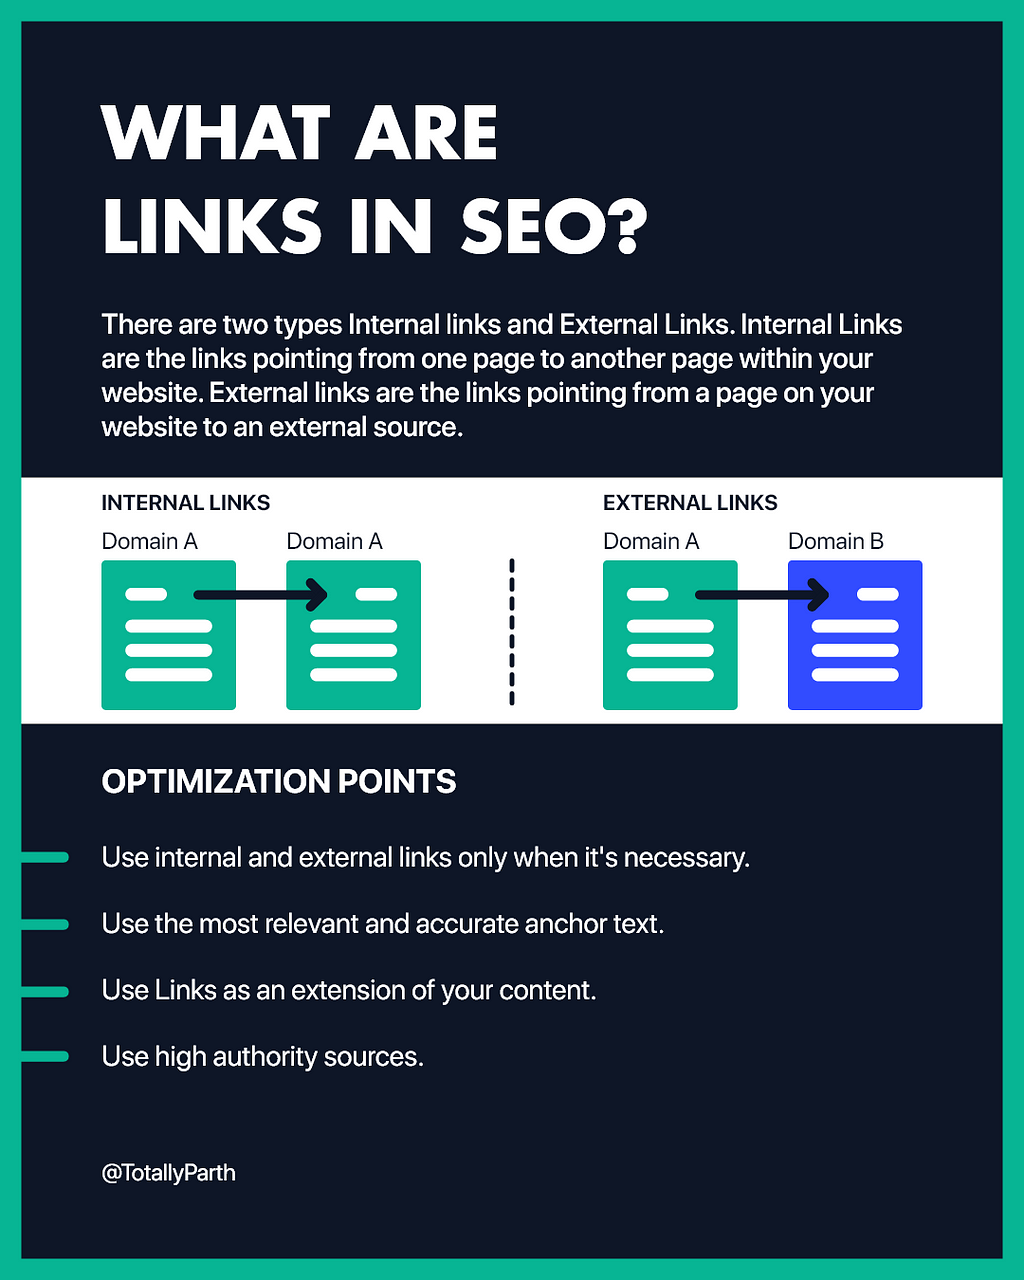 Image with Explanation of Links, Illustration of internal and external links & Optimization points